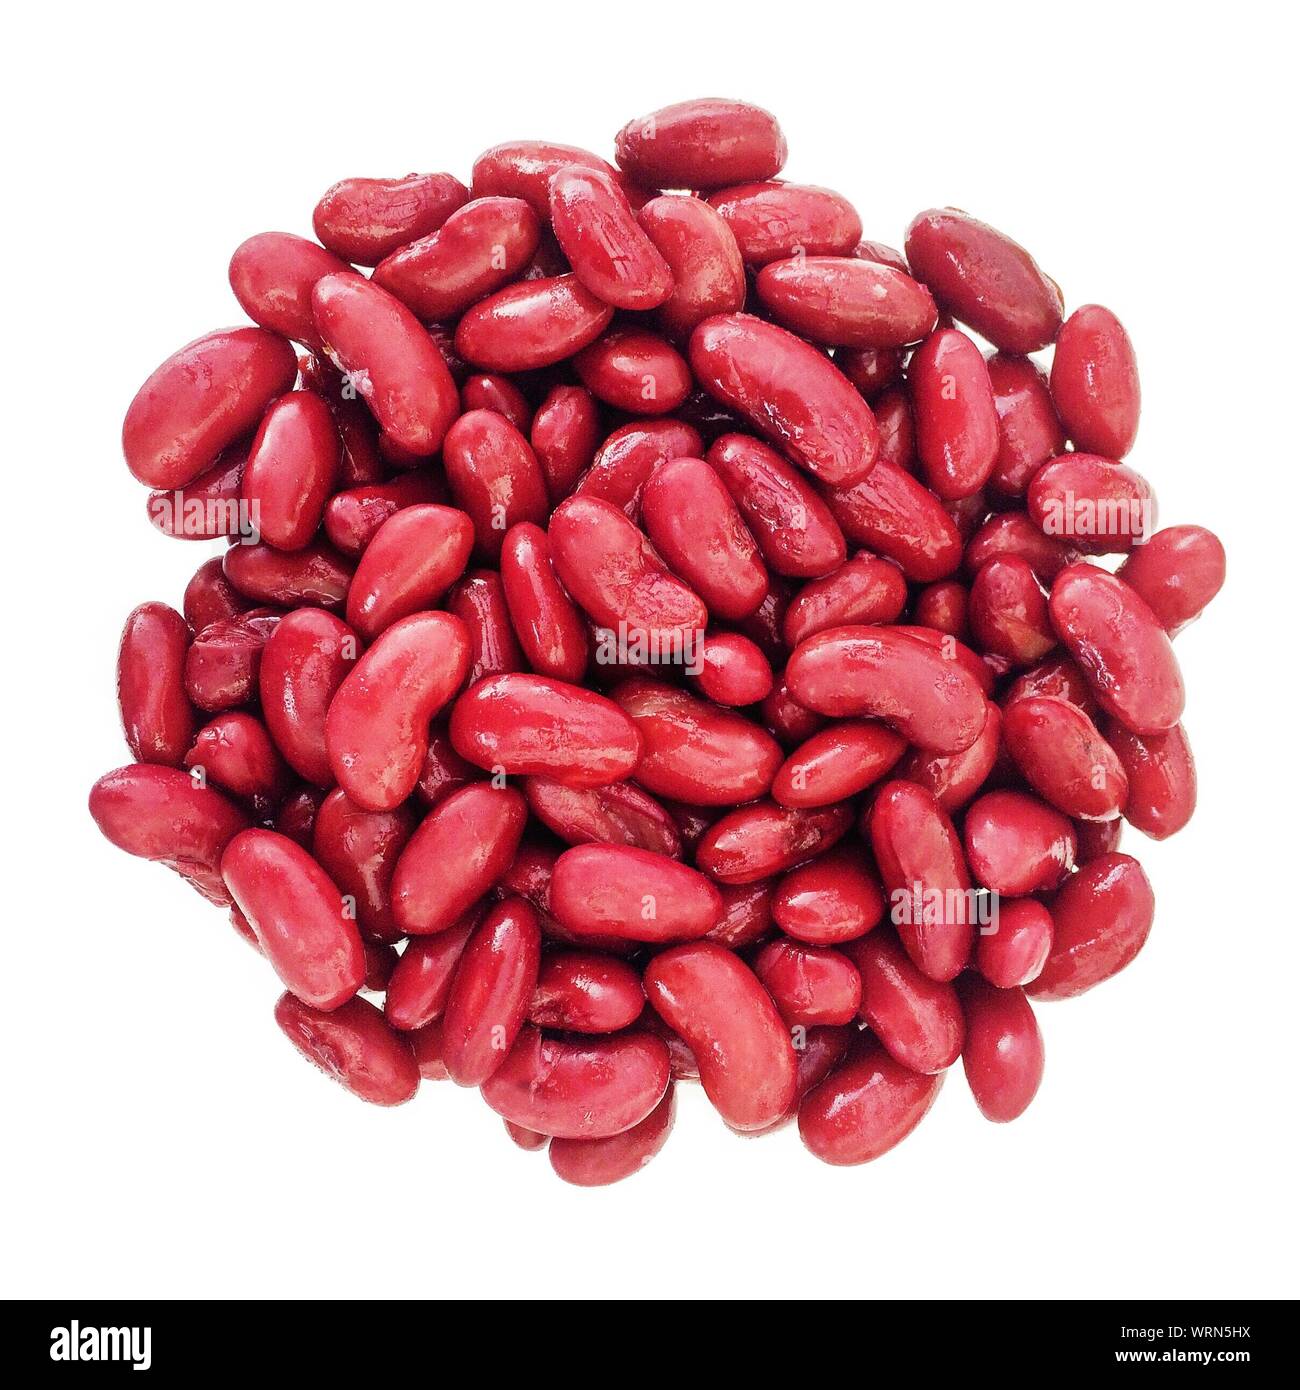 Red Kidney Beans Against White Background Stock Photo